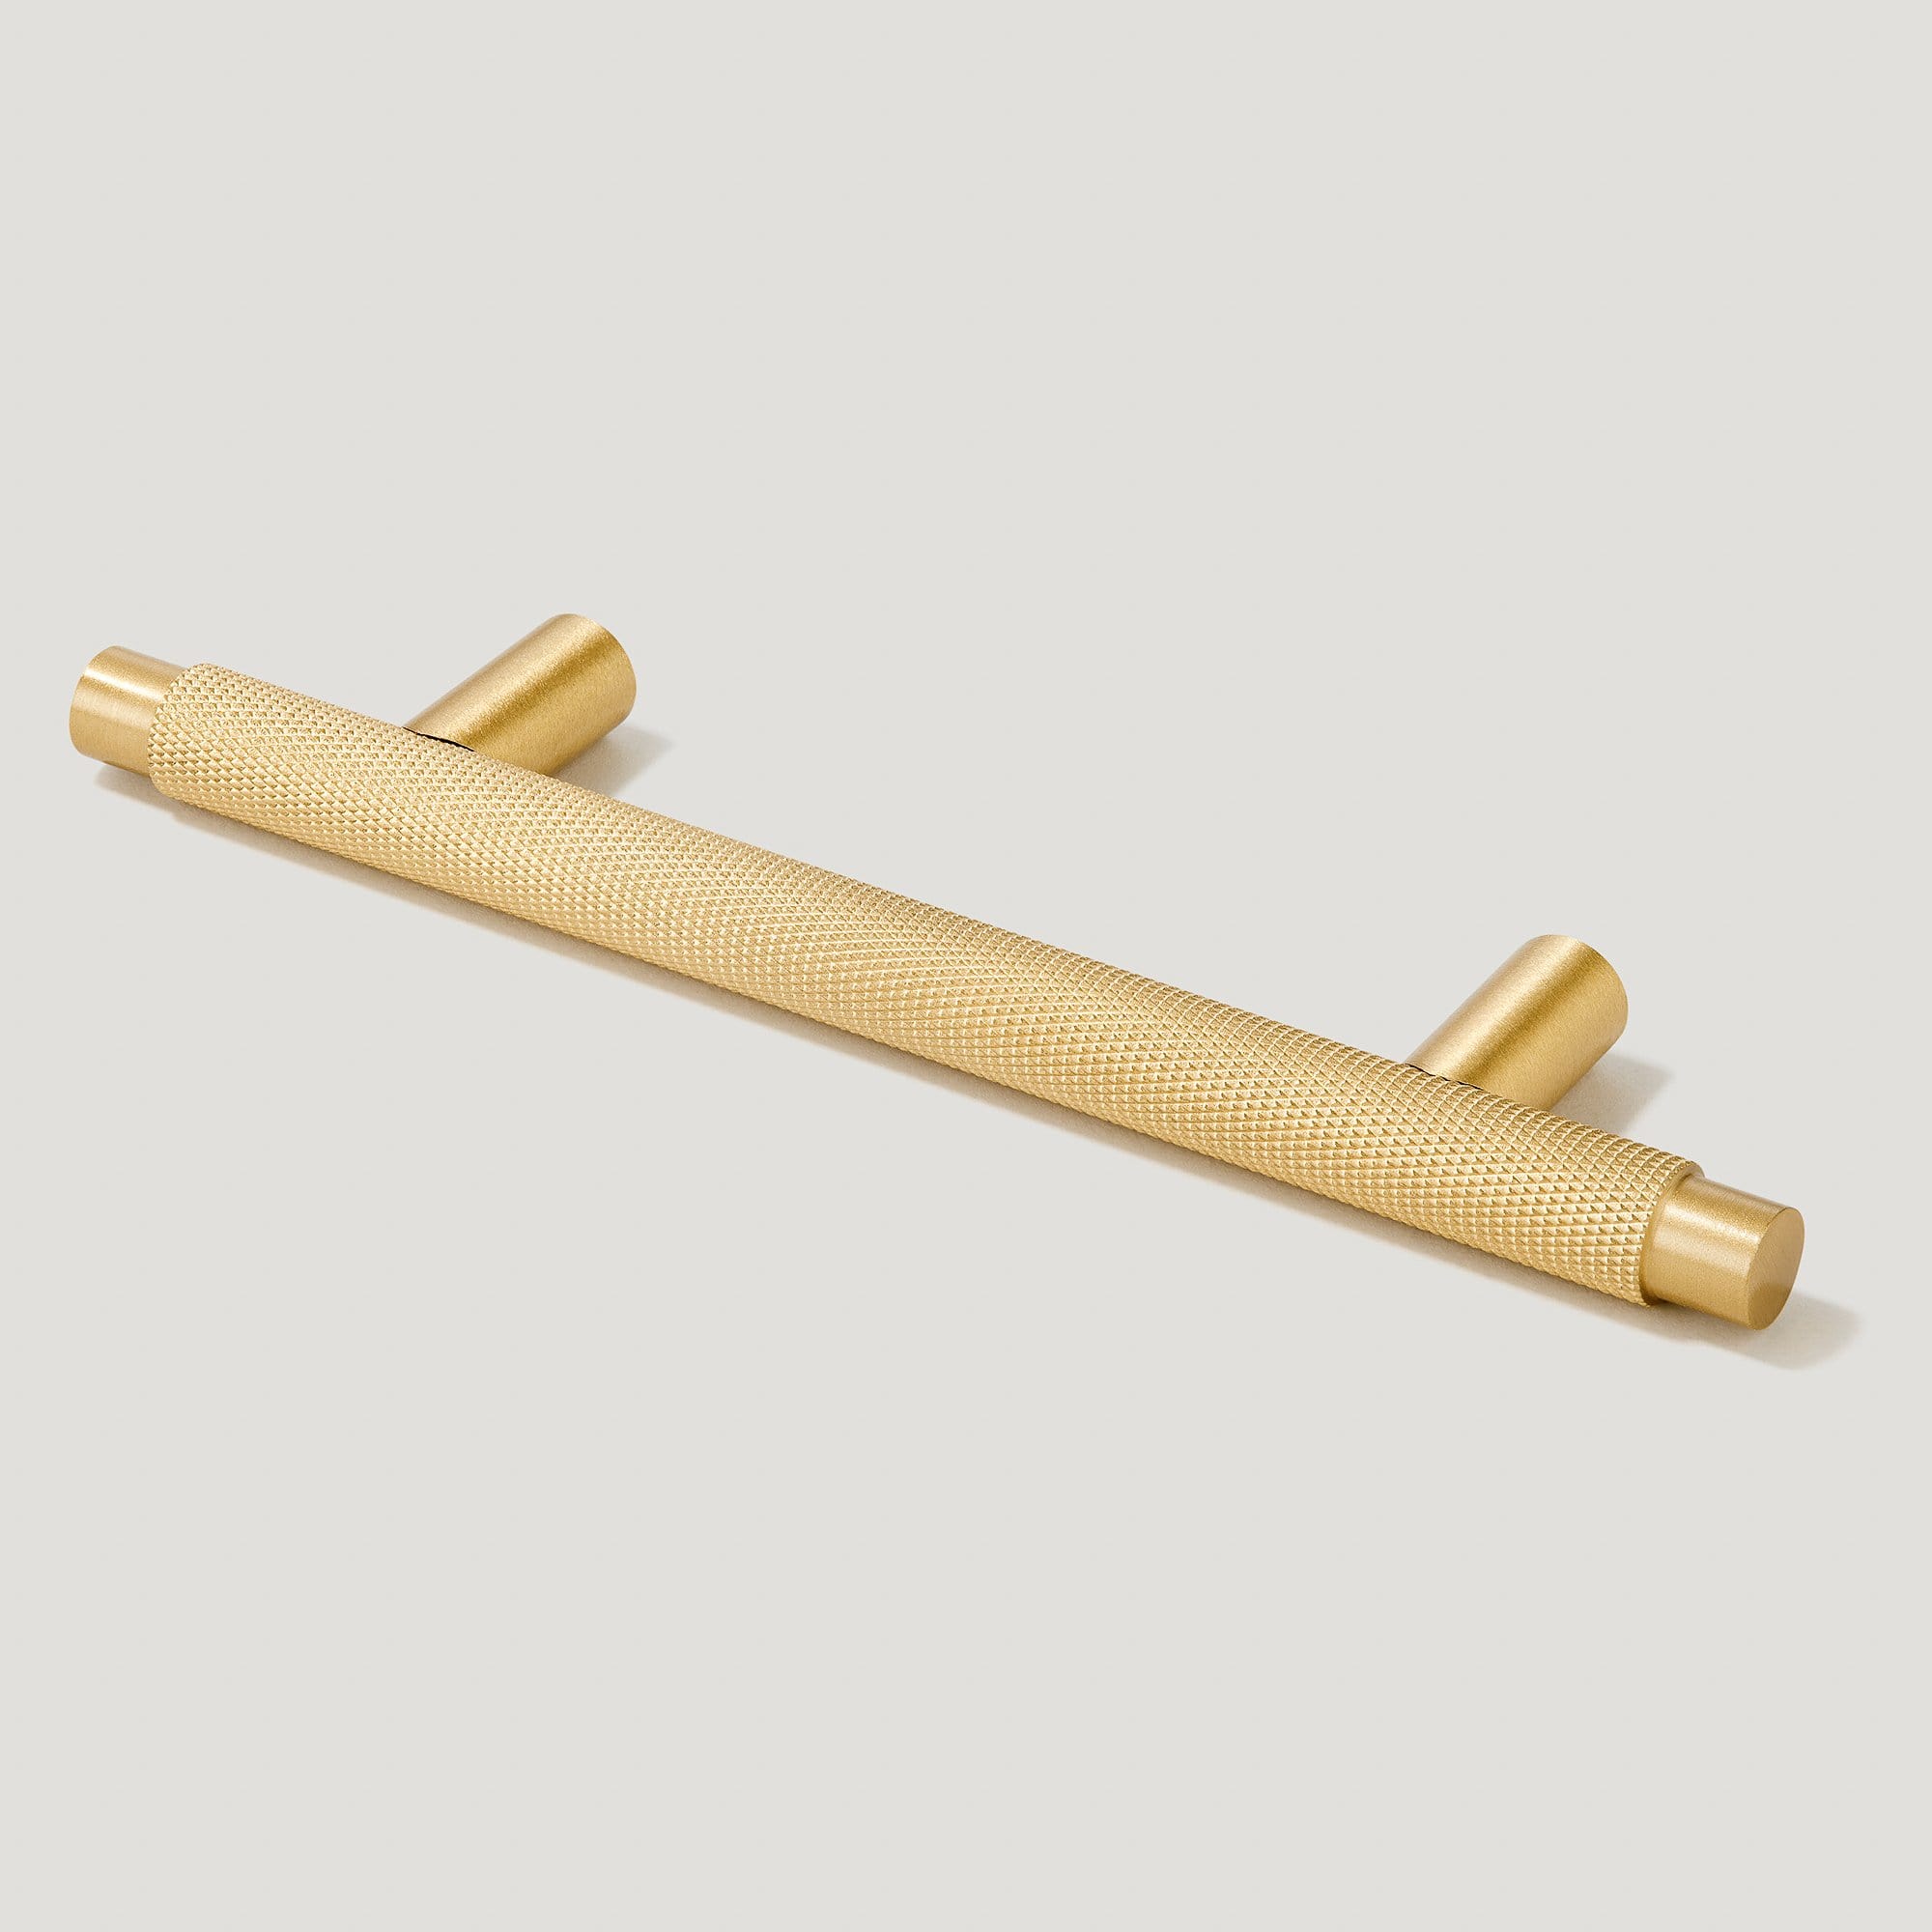 Modern Knurled Cabinet Pulls and Knobs